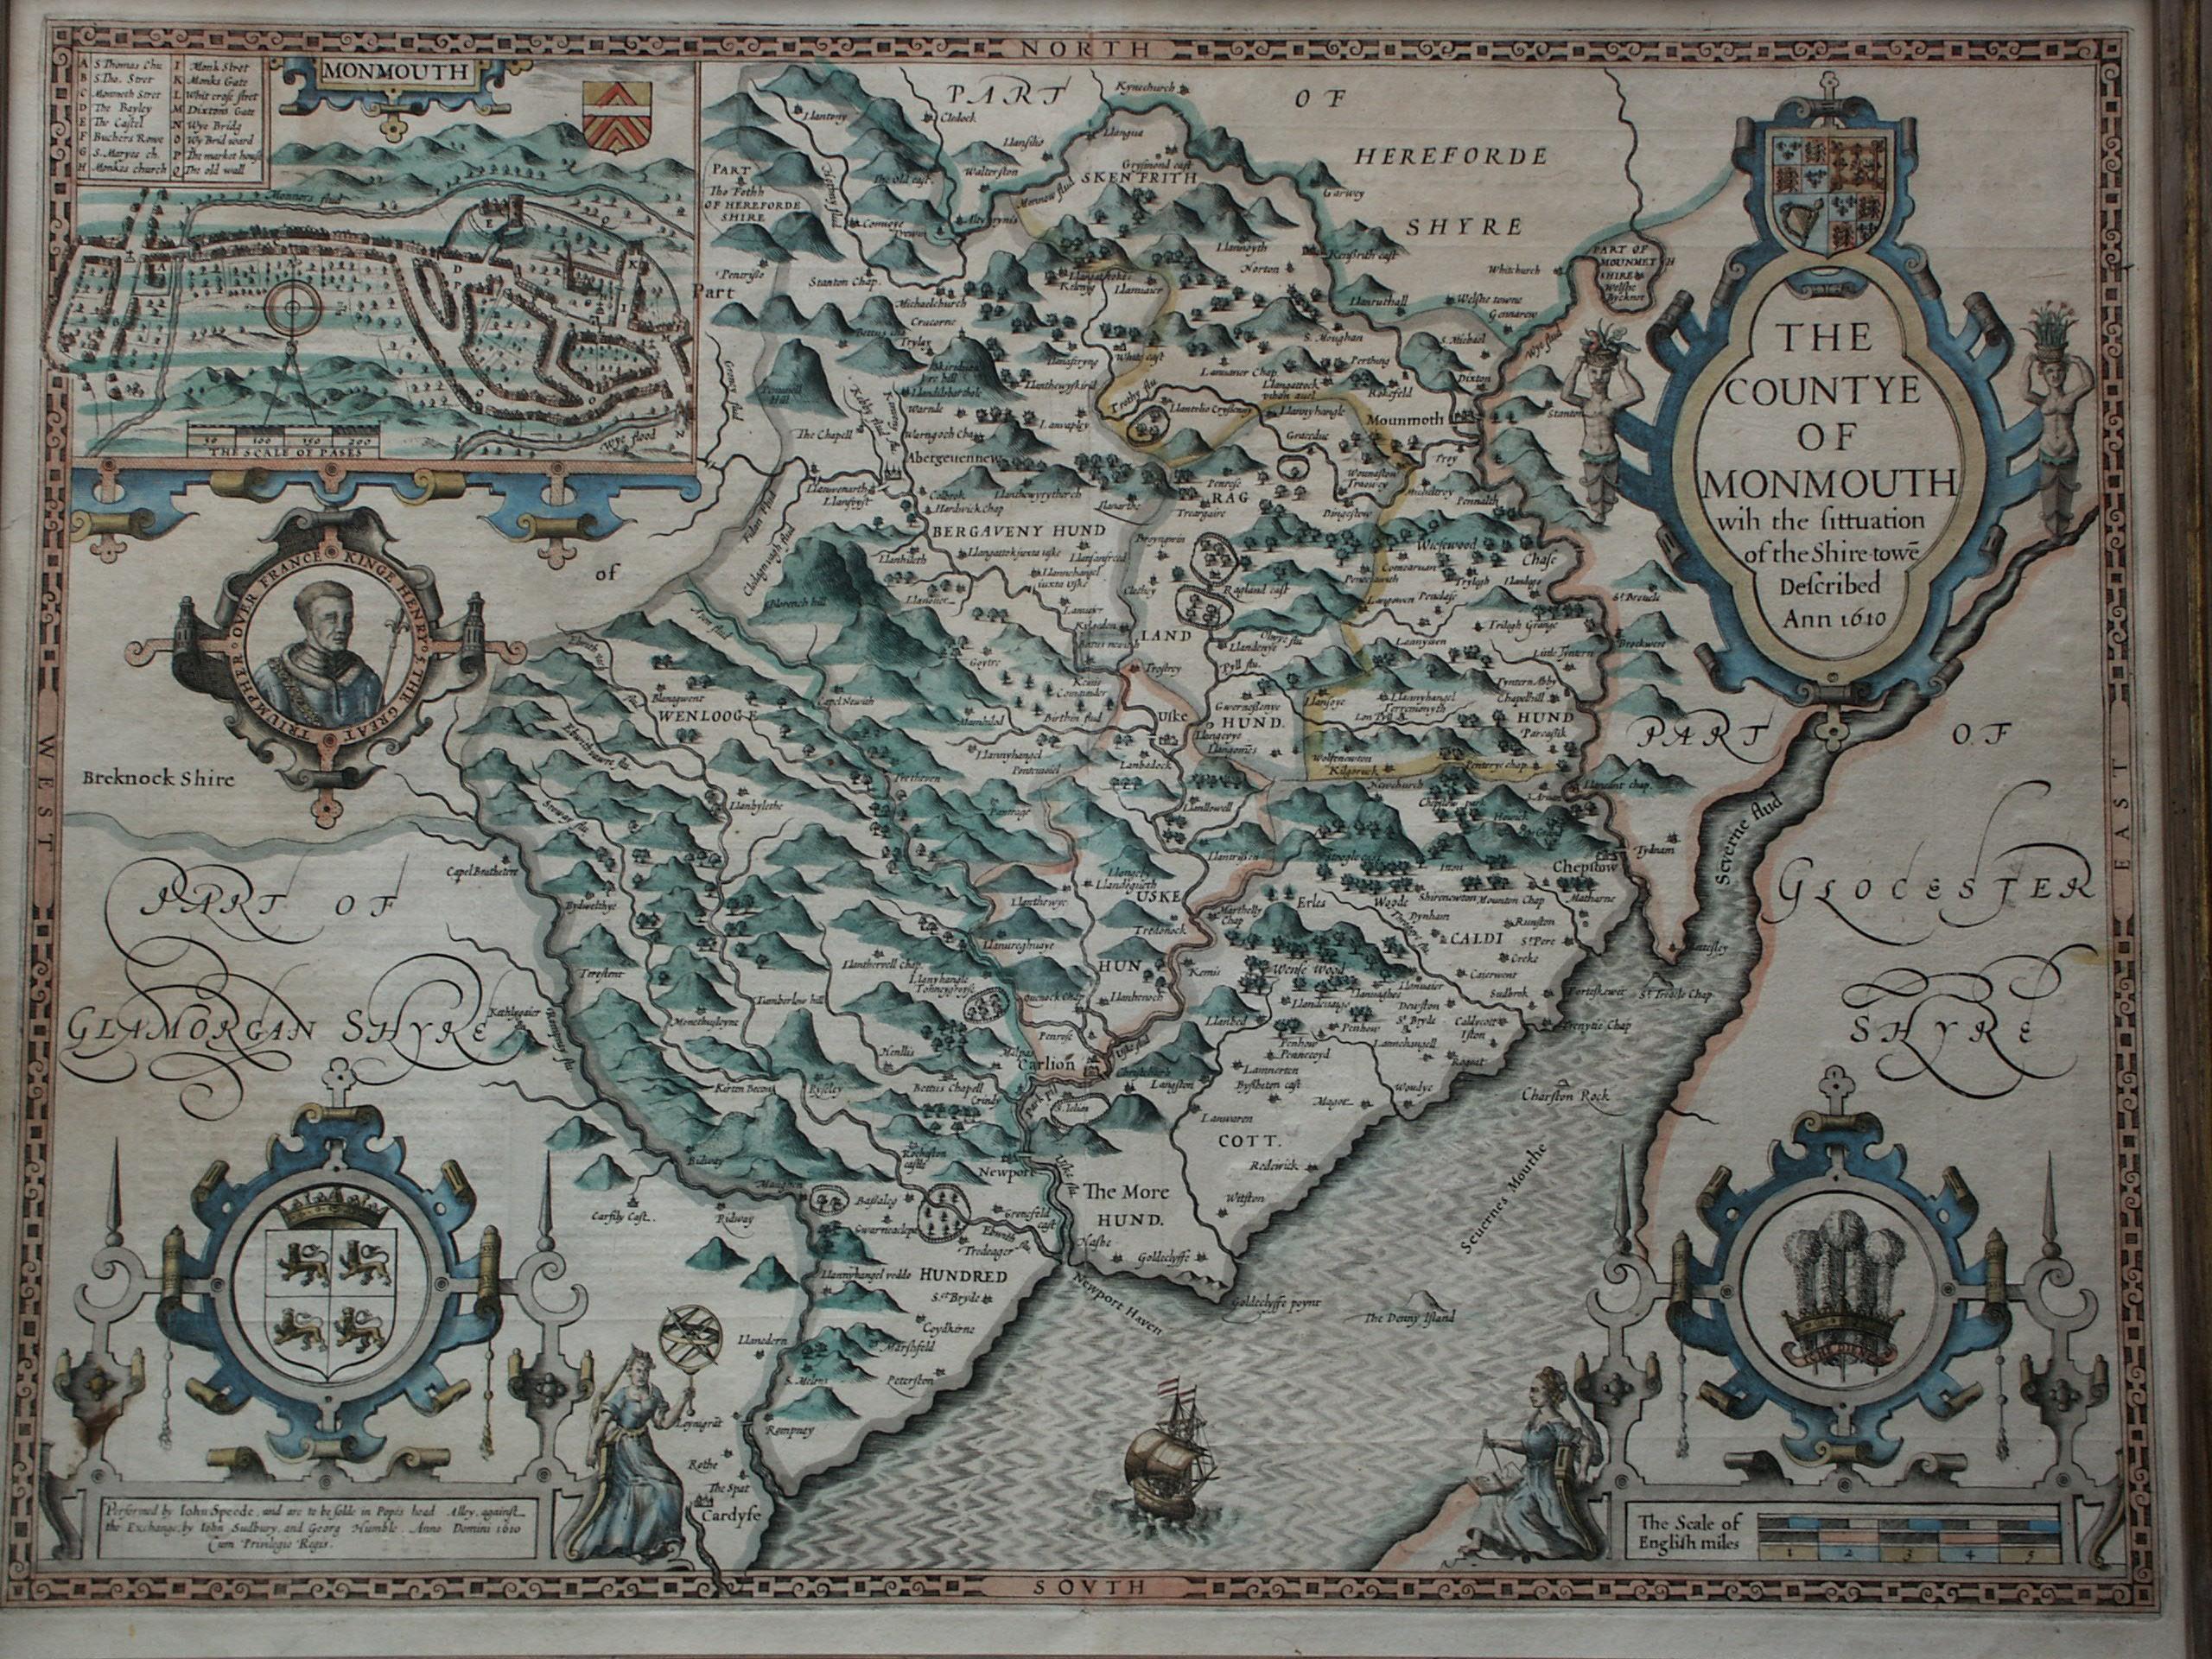 The countye of Monmouth with the situation of the townshire described Anno, 1610
 
 The reverse with Monmouthshire, Chapter VI and an alphabetical list of towns.
 
 In a beautiful Flemish oak polished and gilded frame
 Cartographer: John Speed